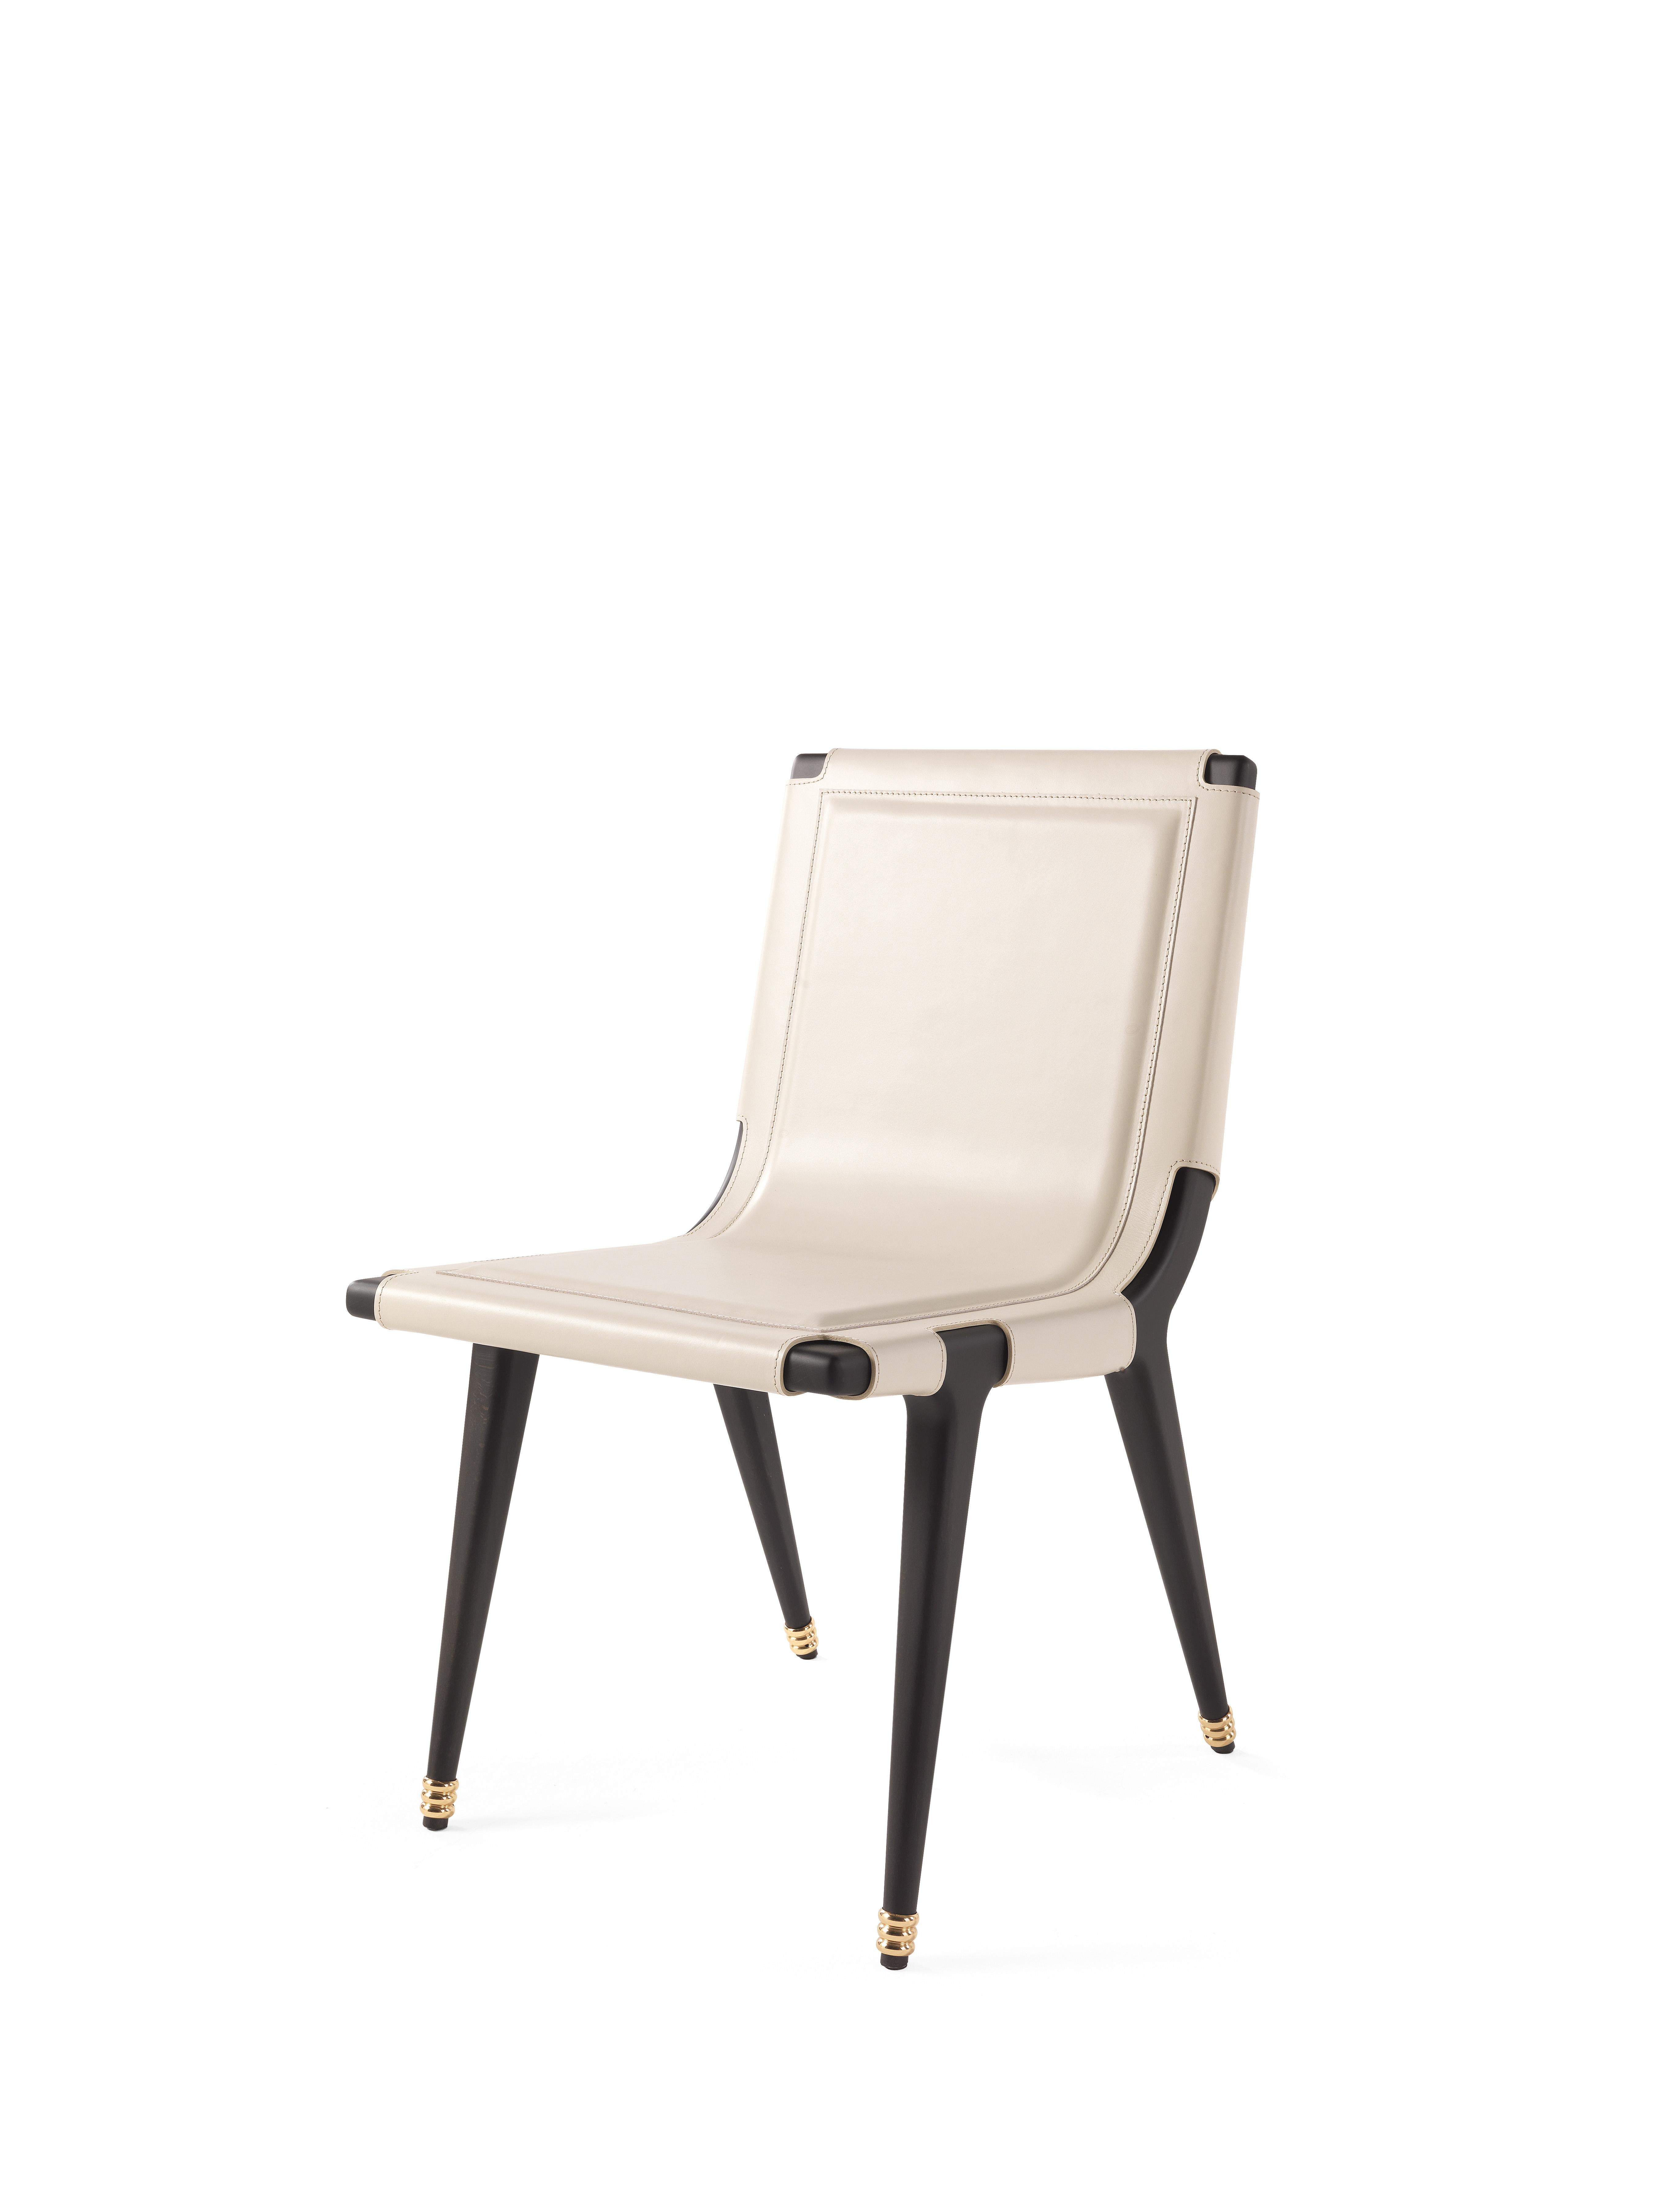 Dinka is a chair full of fascinating details and evocative references.
The precious upholstery in ivory saddle leather features special eyelets lace-up on the back.
The structure with matt dark wengé dye is enriched by polished brass rings,